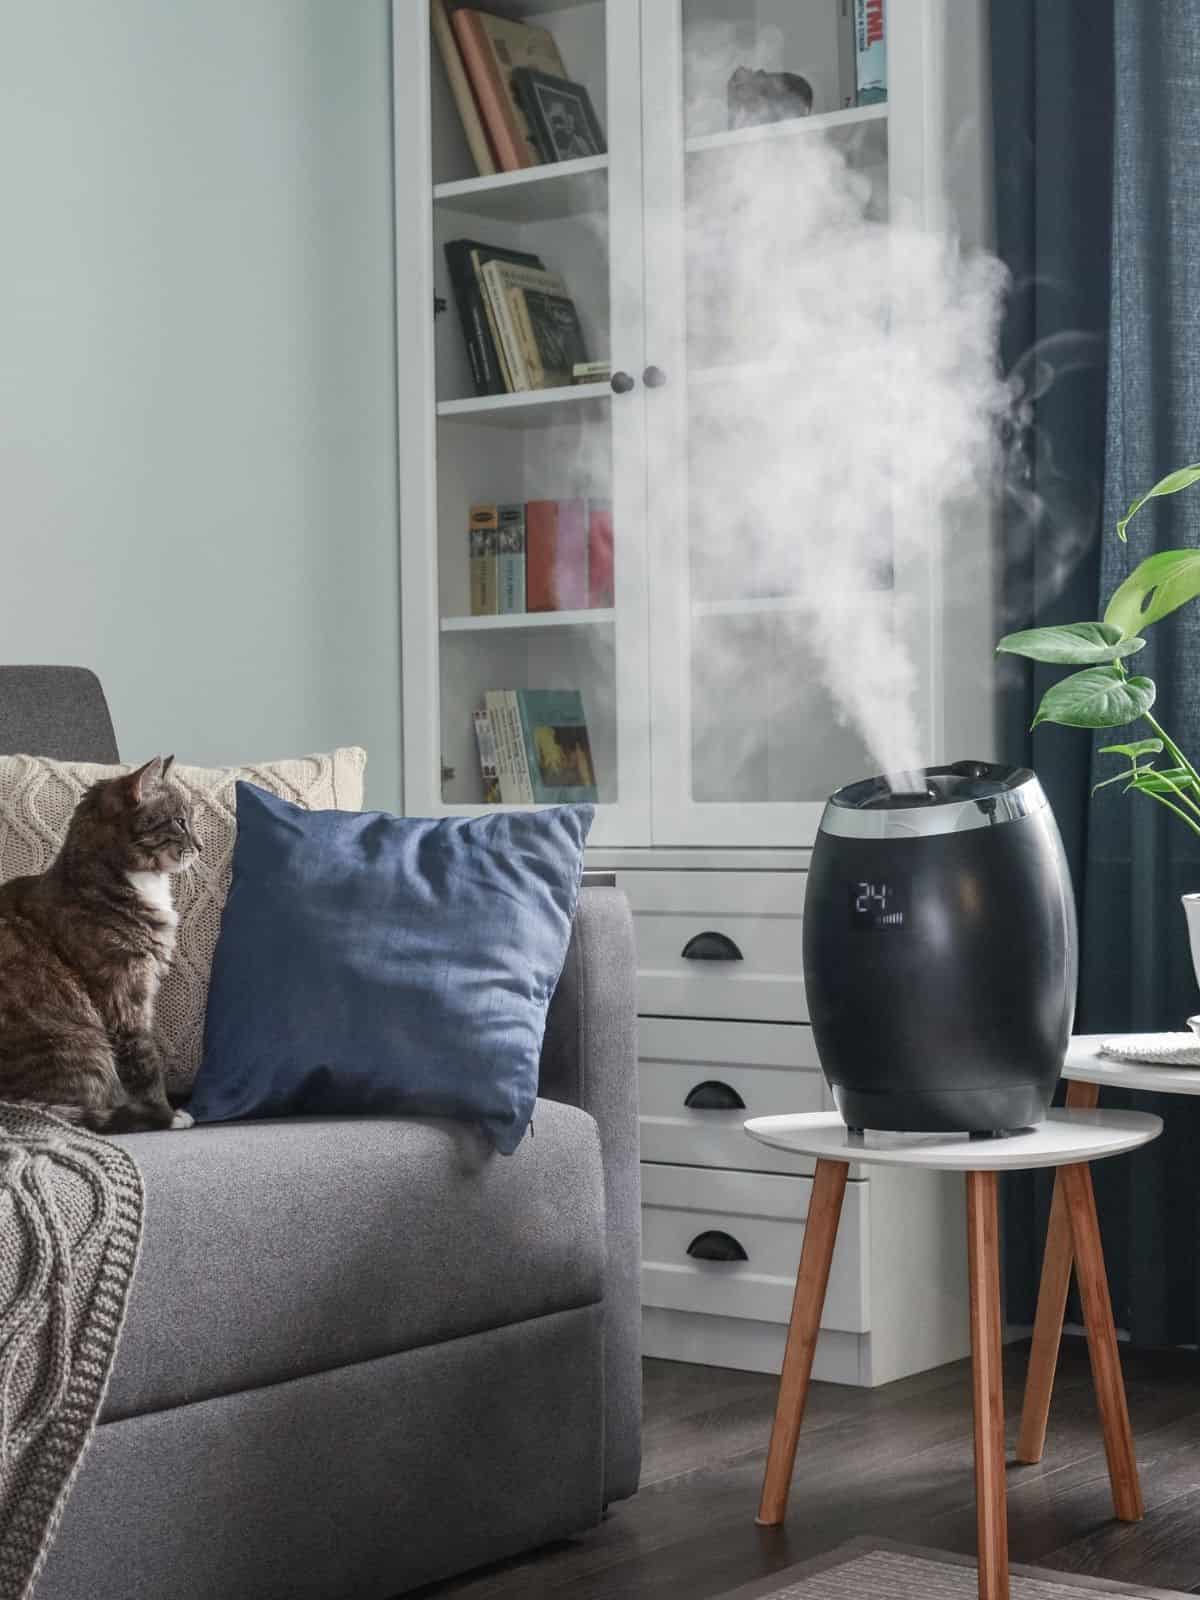 Black humidifier on side table dispersing moisture into air.